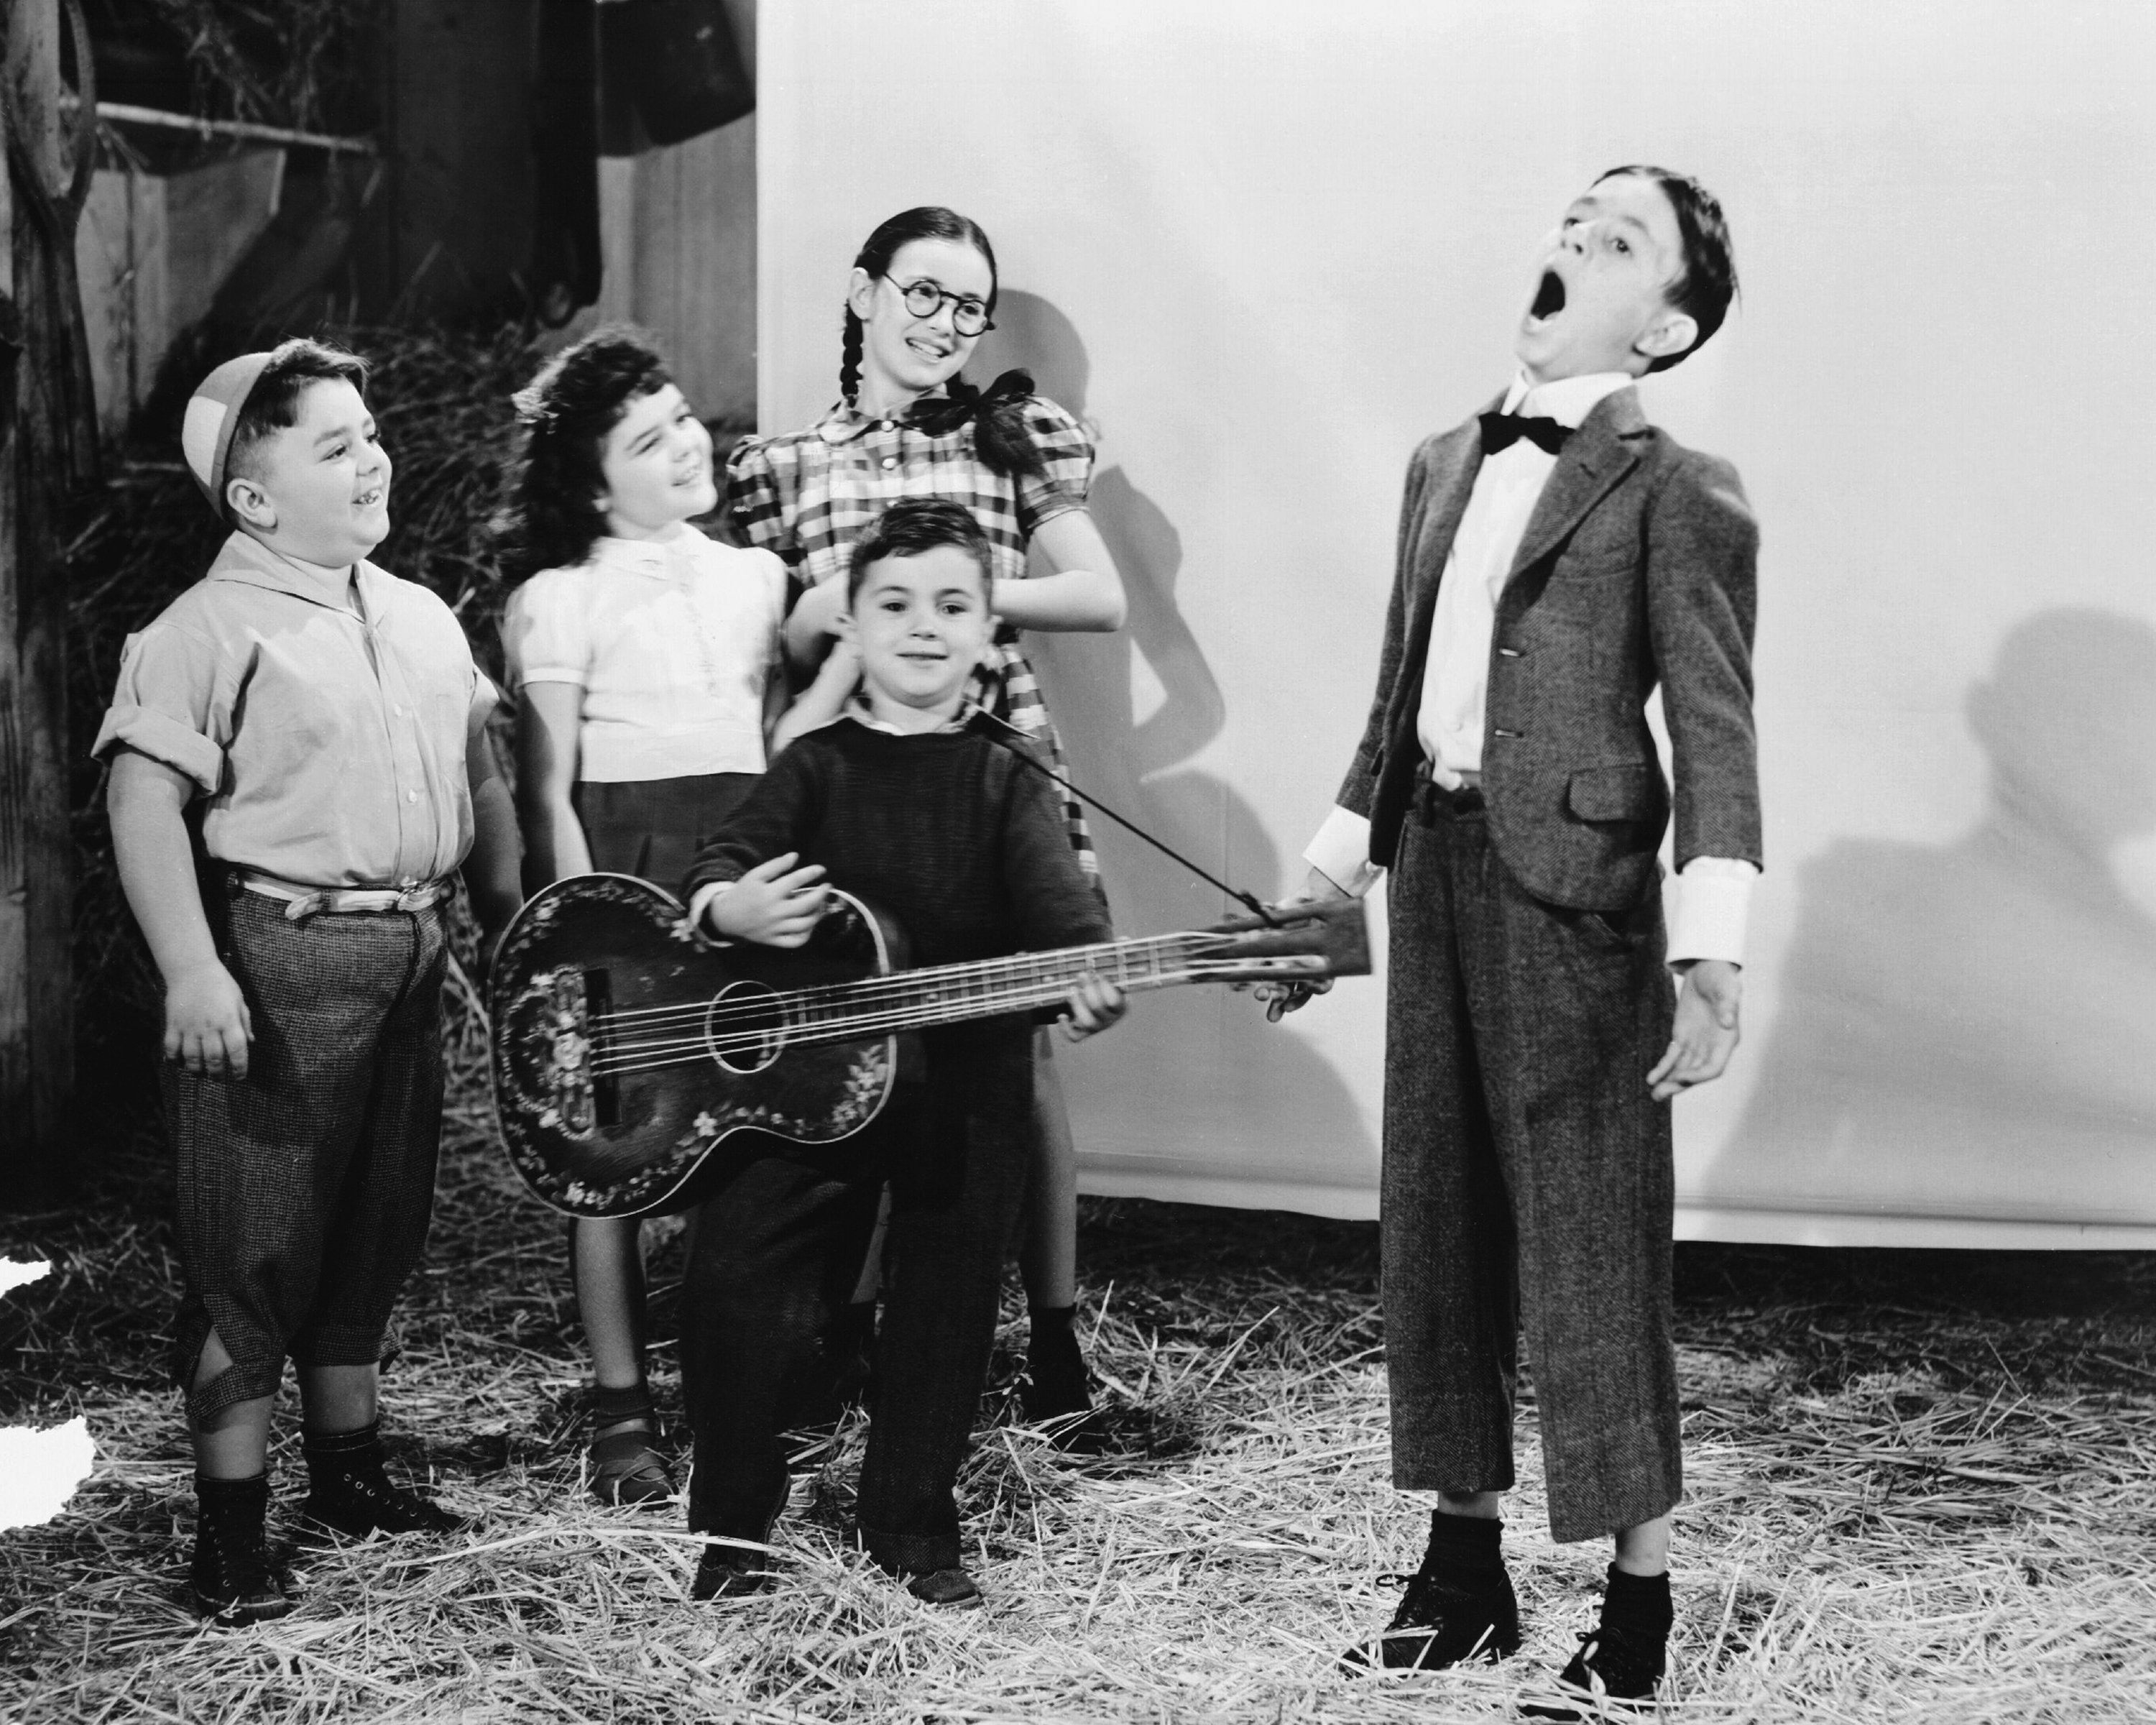 The cast of Our Gang/The Little Rascals singing, circa 1930. | Source: Getty Images